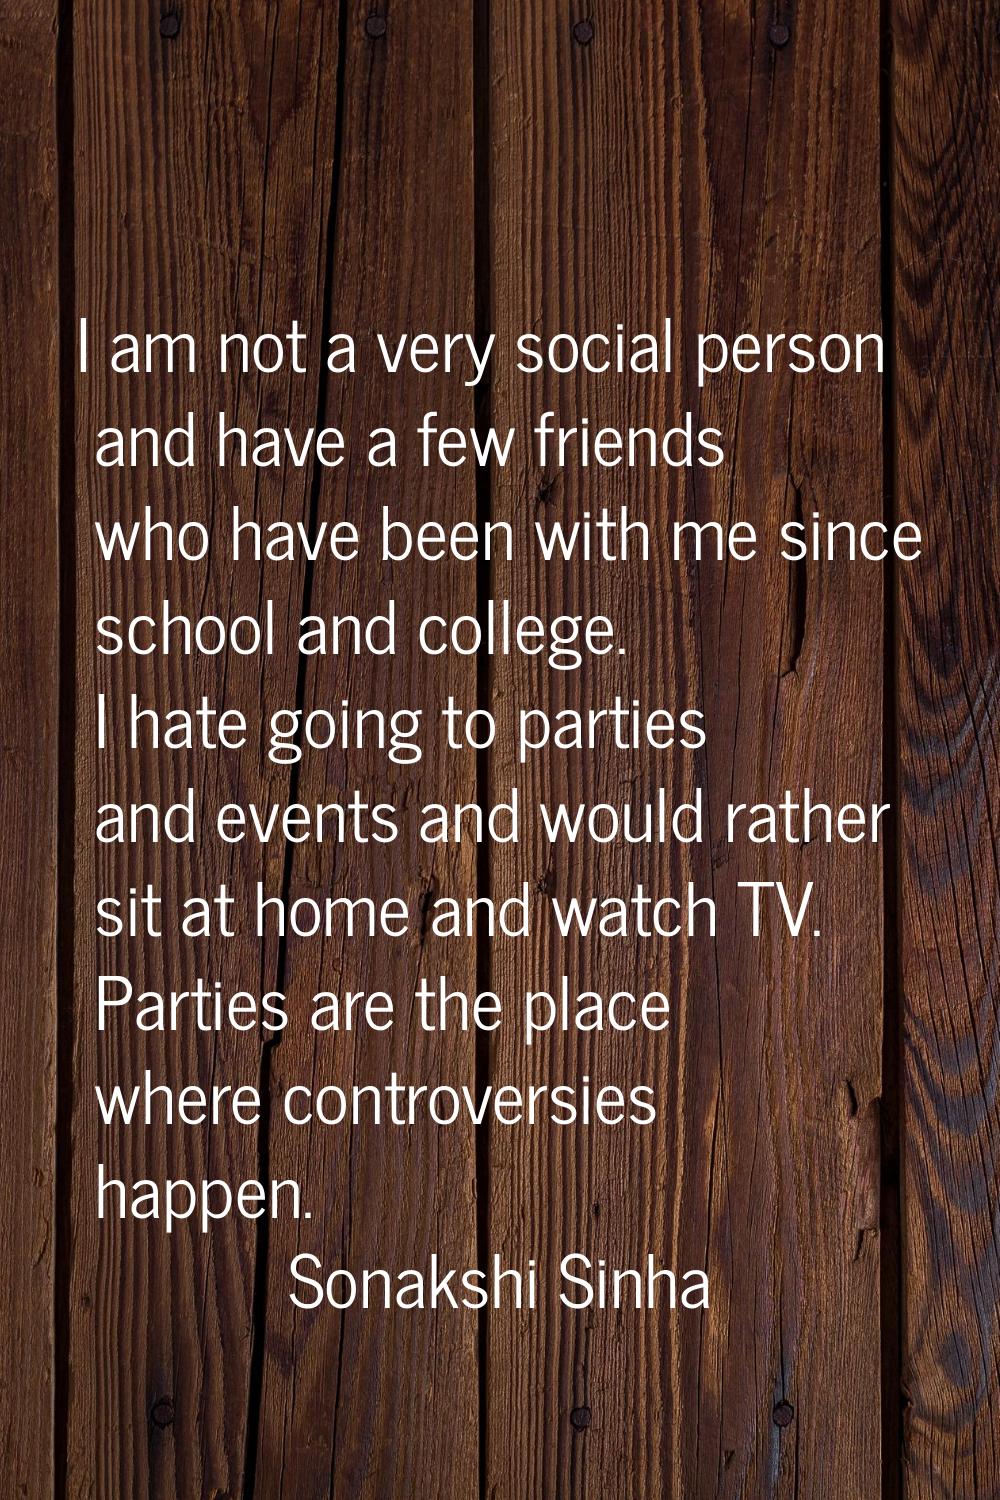 I am not a very social person and have a few friends who have been with me since school and college